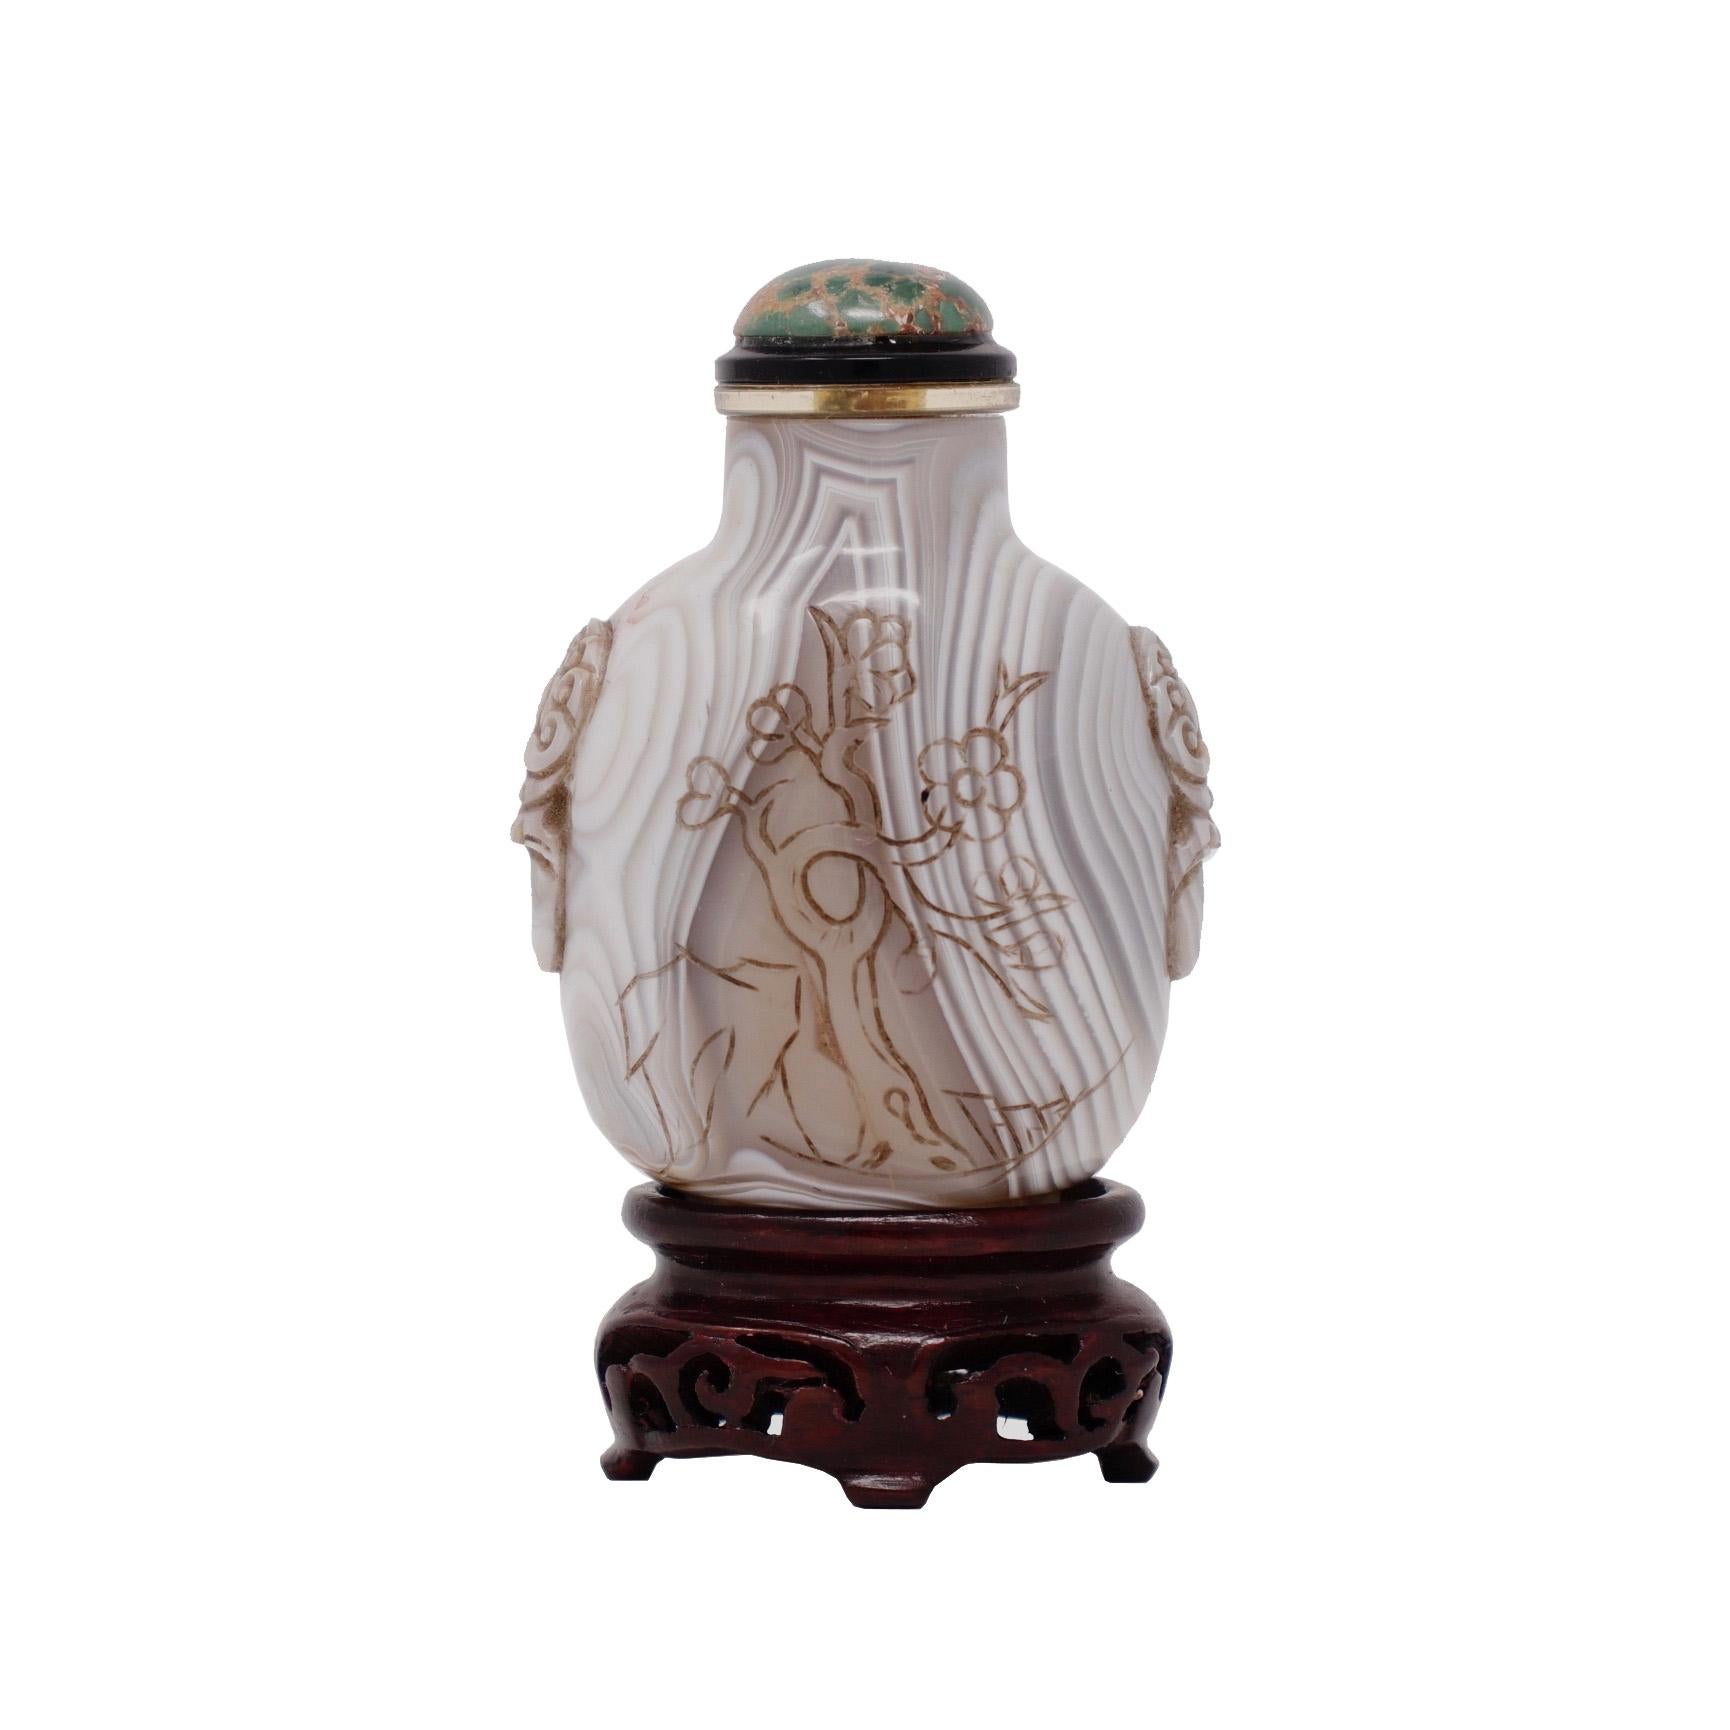 Chinese banded agate snuff bottle of flattened ovoid form, carved with a mock lion mask and ring handle on each shoulder, sturdy raised oval foot, countersunk base, flat mouth rim and narrow aperture, one side with symmetrical banding the other with